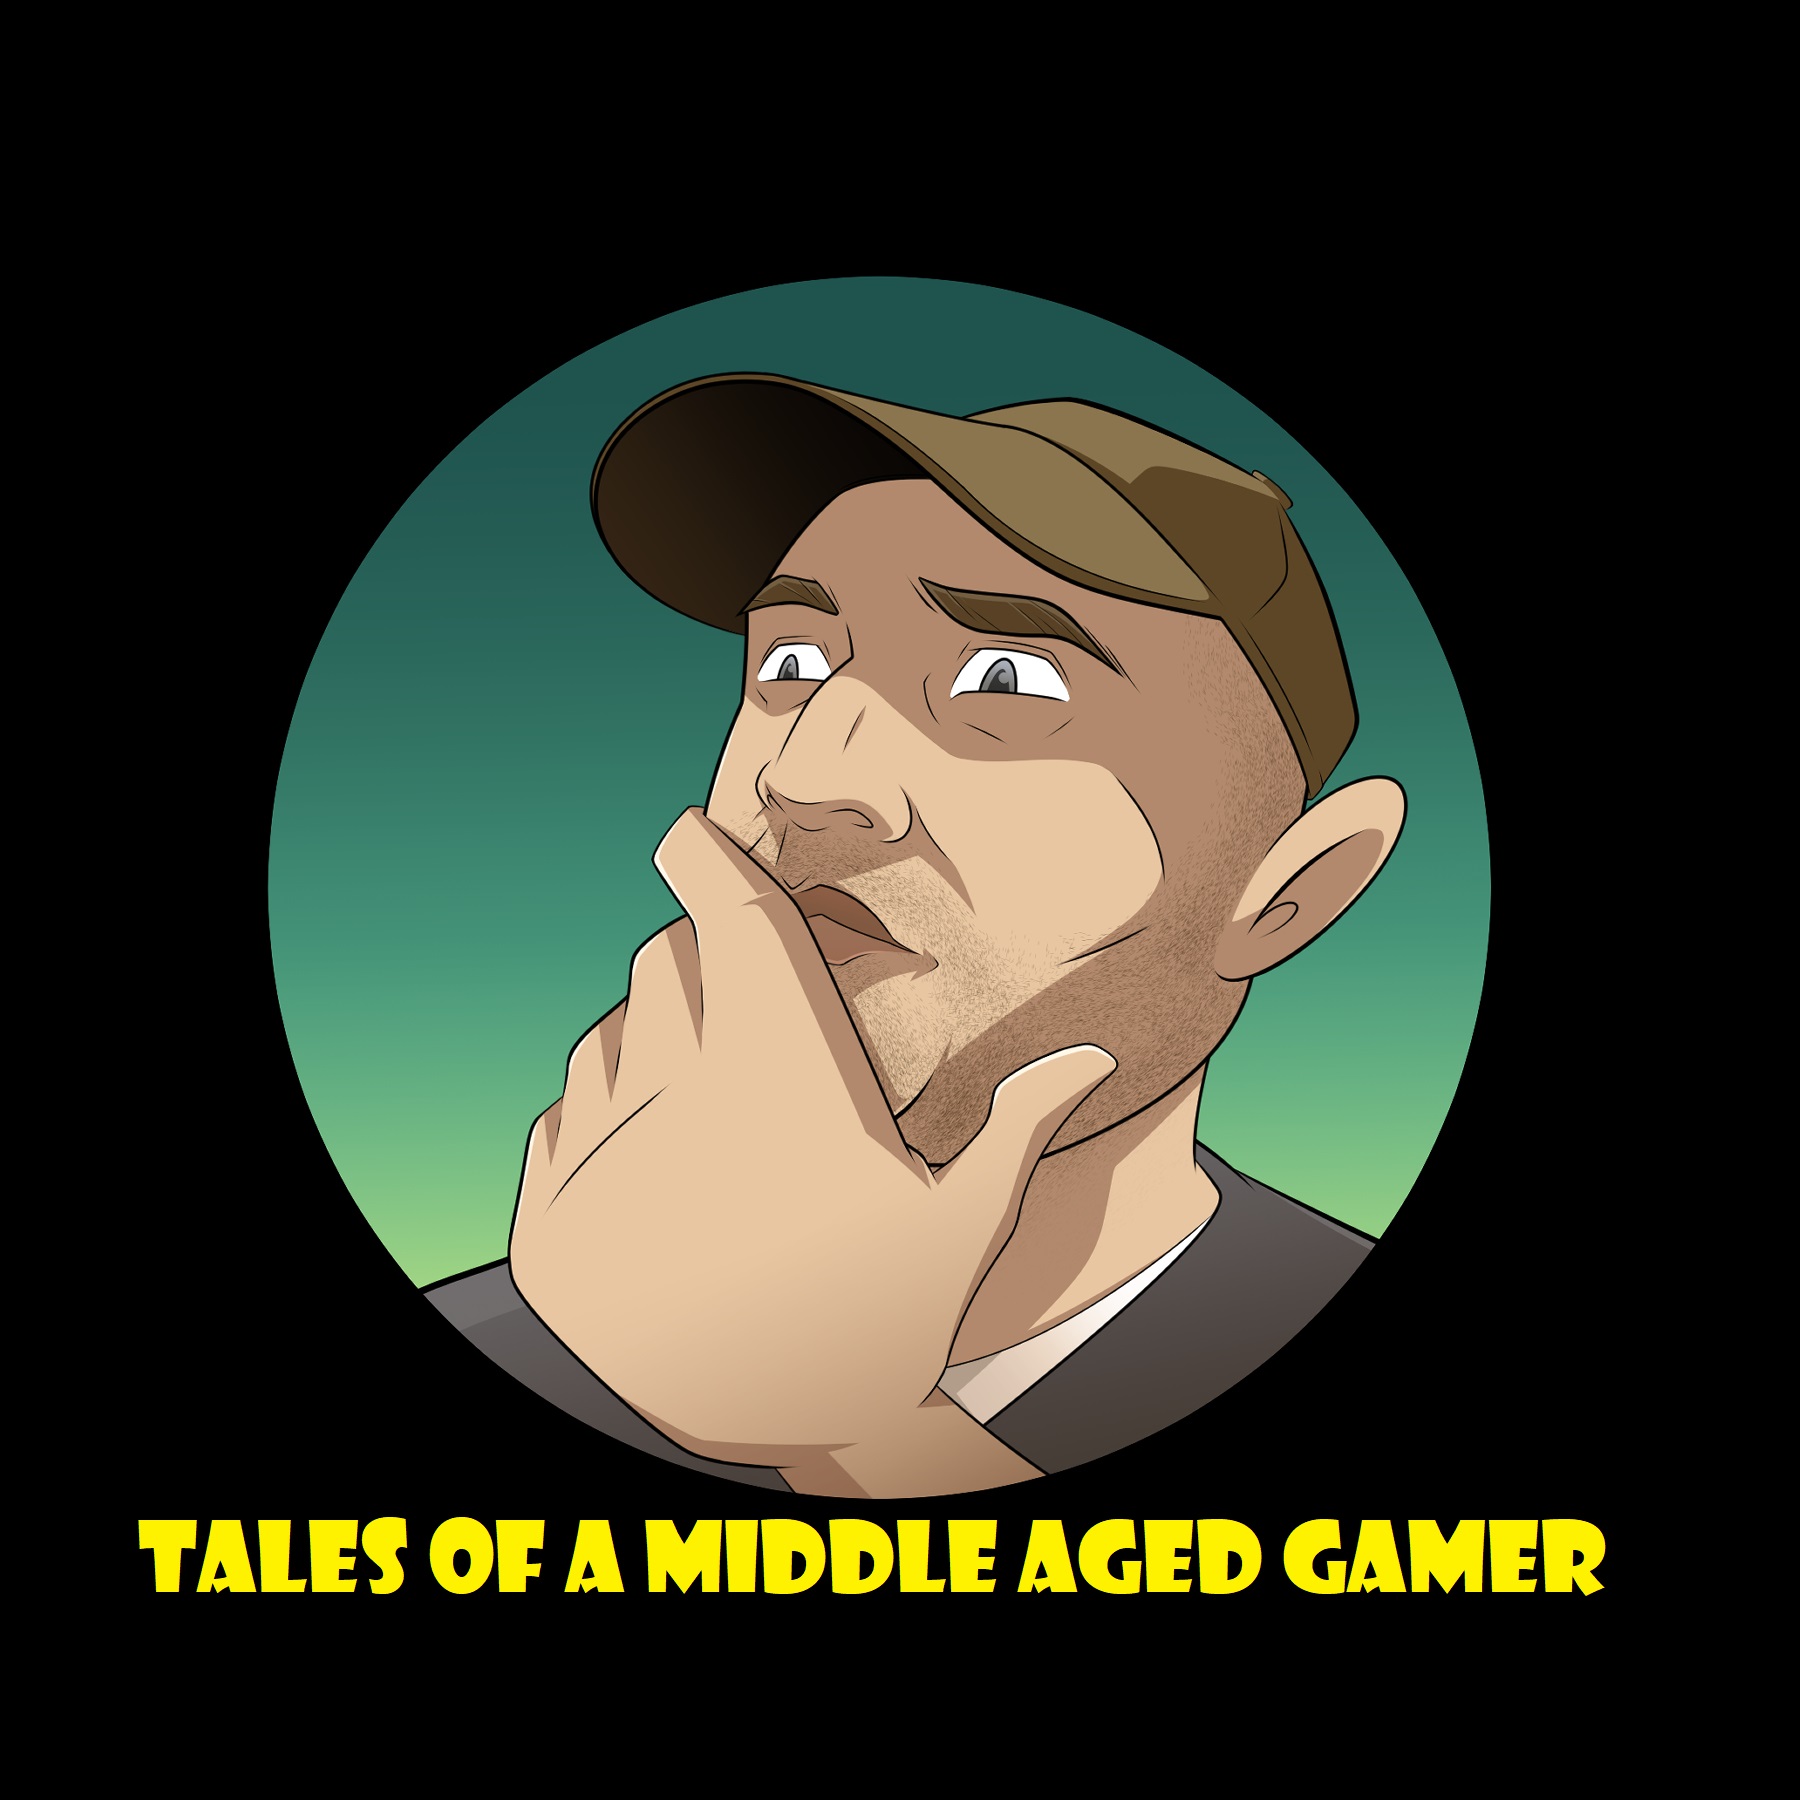 Tales of a Middle Aged Gamer